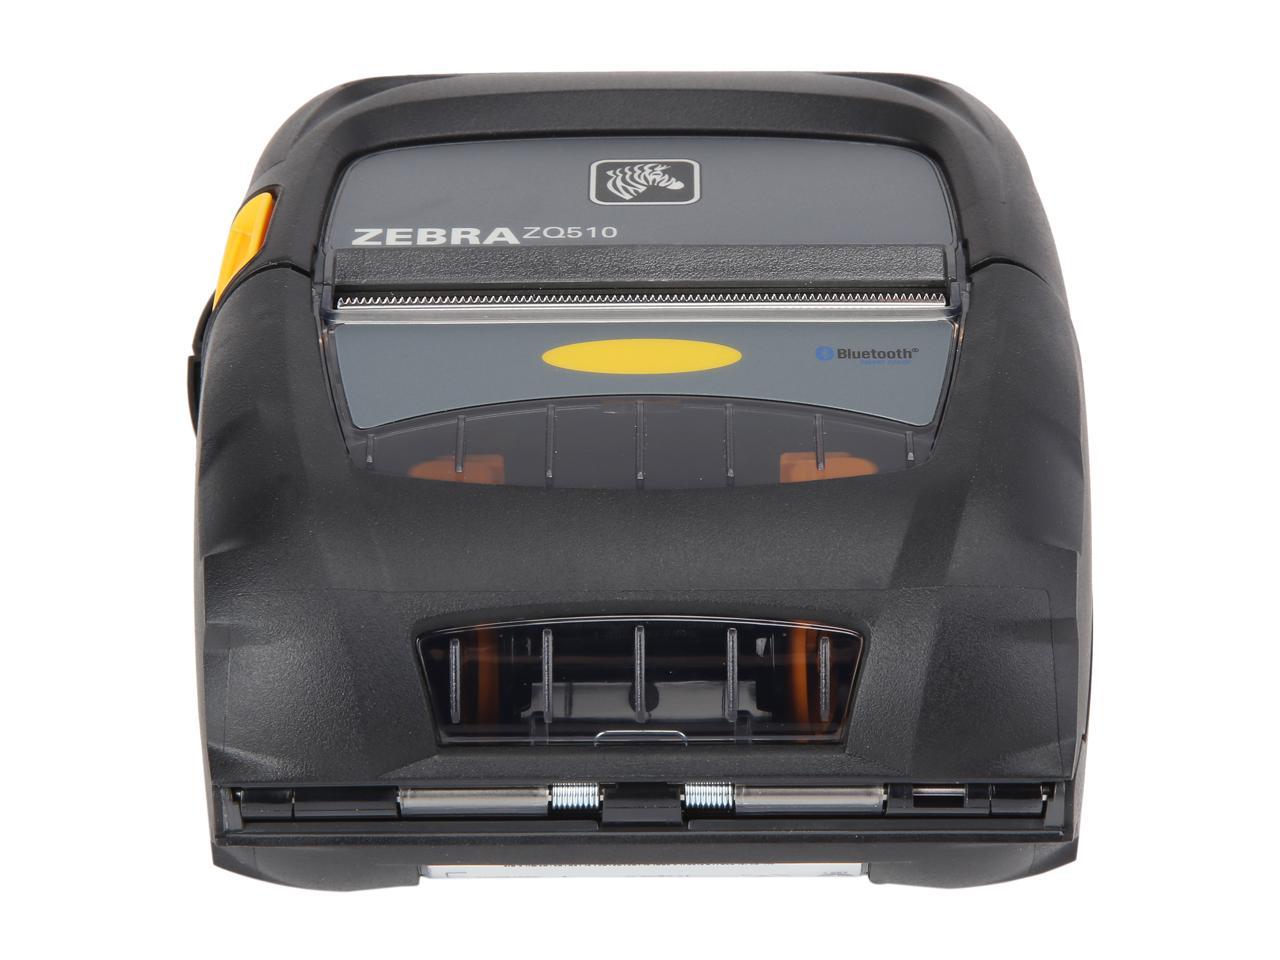 Zebra Zq510 3 Mobile Direct Thermal Receipt And Label Printer 203 Dpi Bluetooth 40 Linered 9704